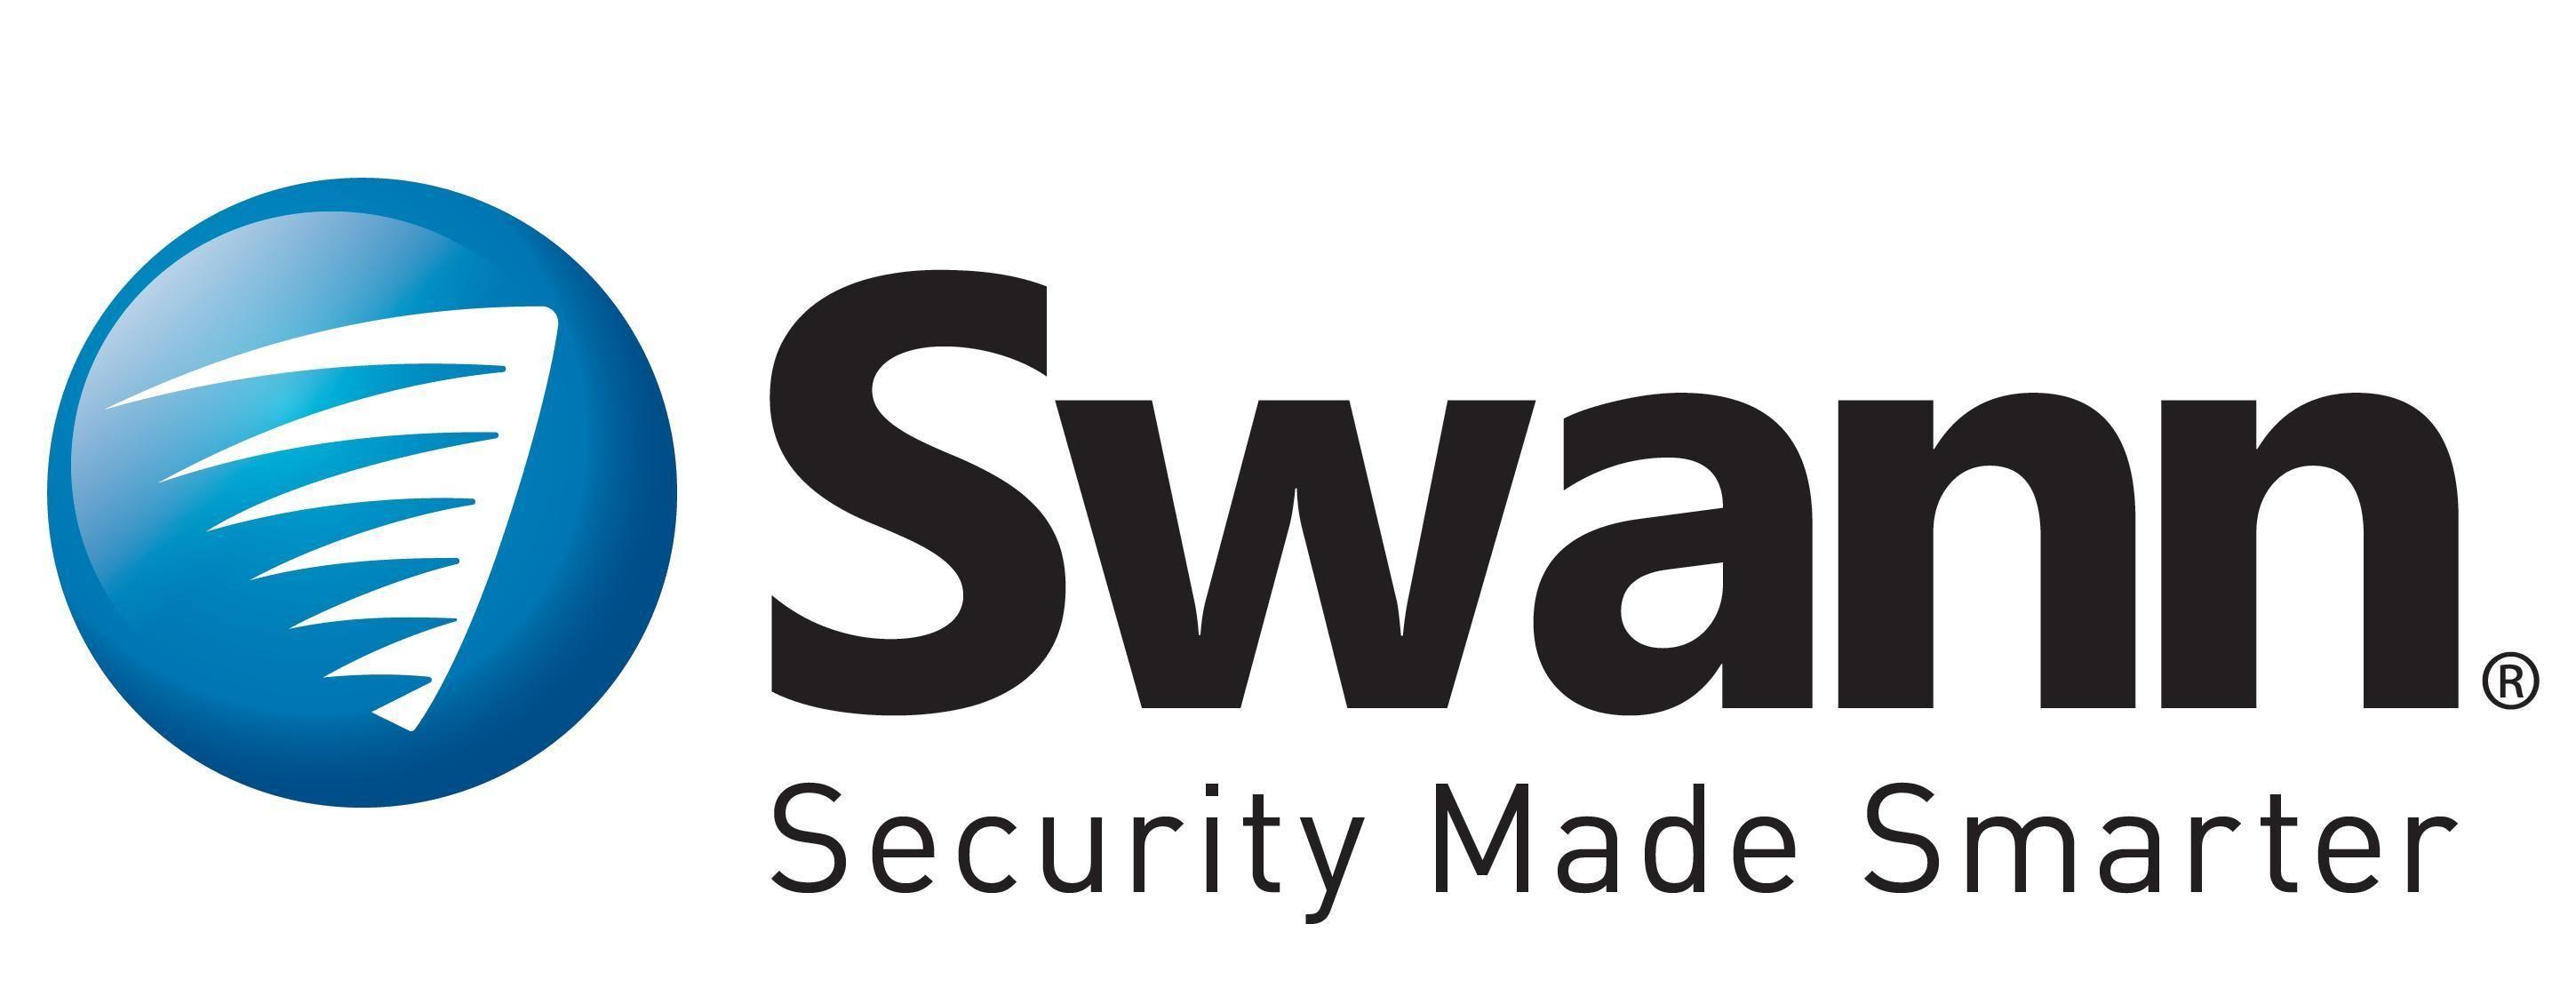 Swann Logo - Swann Competitors, Revenue and Employees Company Profile